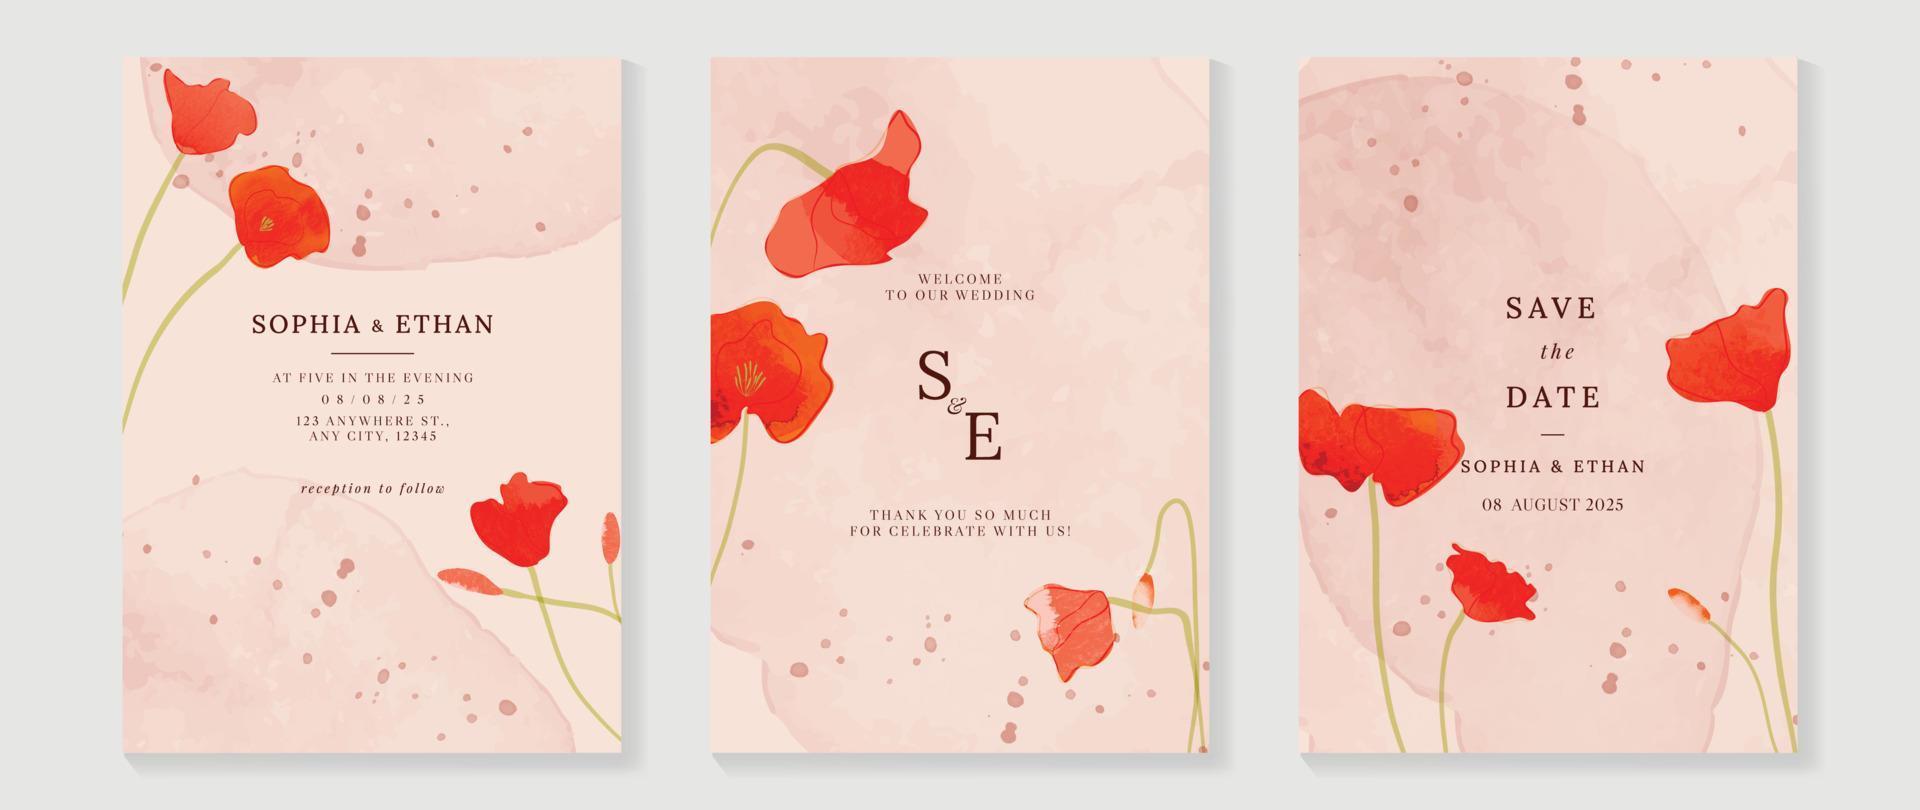 Luxury wedding invitation card background vector. Watercolor hand painted botanical flowers and ink drop texture template background. Design illustration for wedding and vip cover template, banner. vector